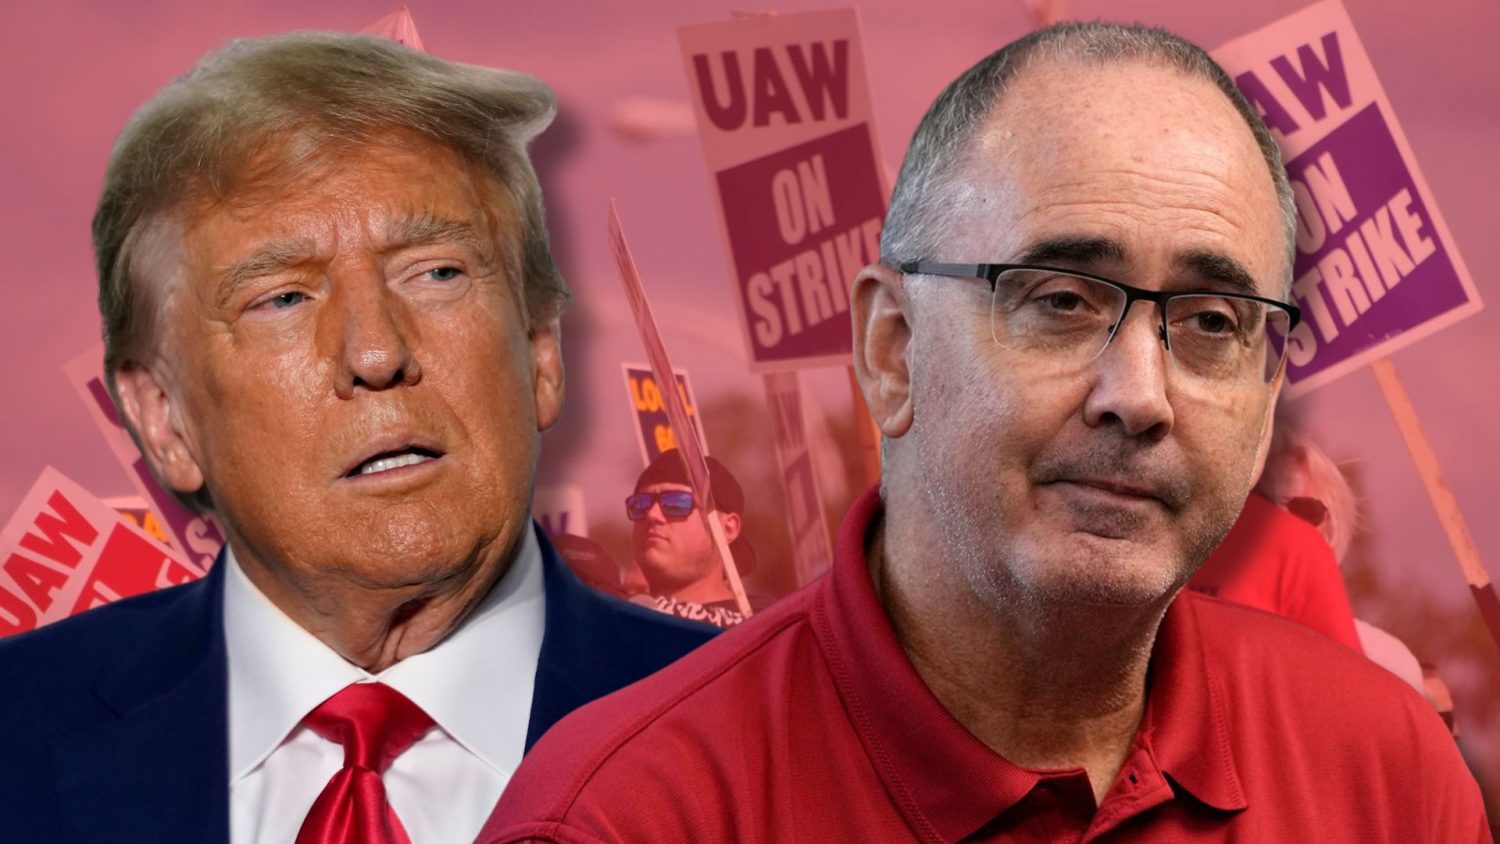 UAW president Shawn Fain and GOP candidate Donald Trump traded insults on TV and social media following the union's endorsement of Biden.